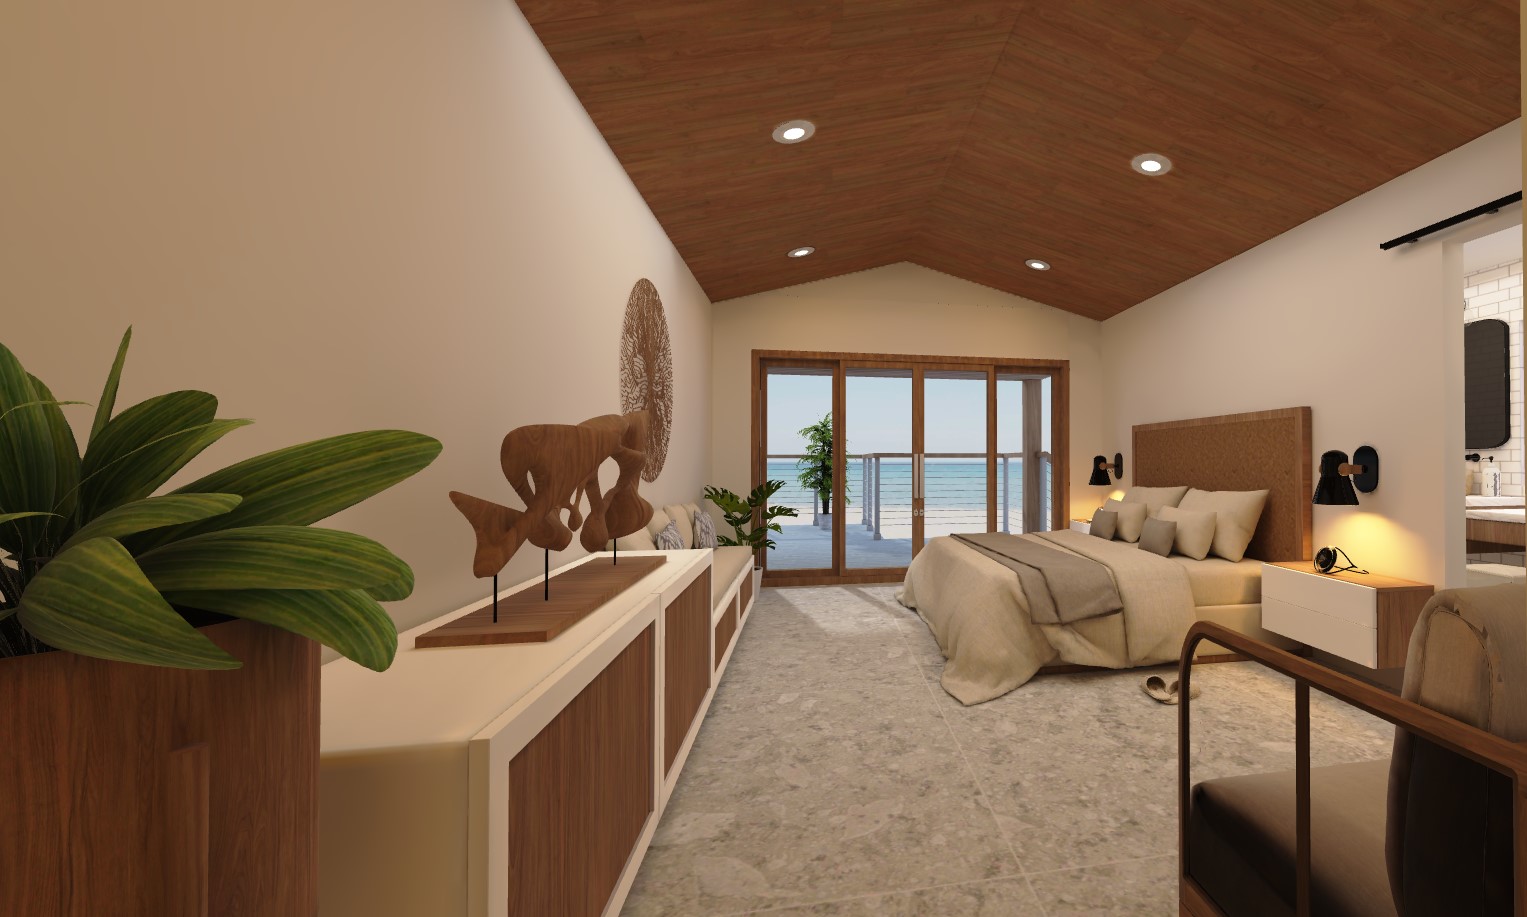 POINT-LOMA-OCEAN-VIEW-REMODEL-ADDITION-6